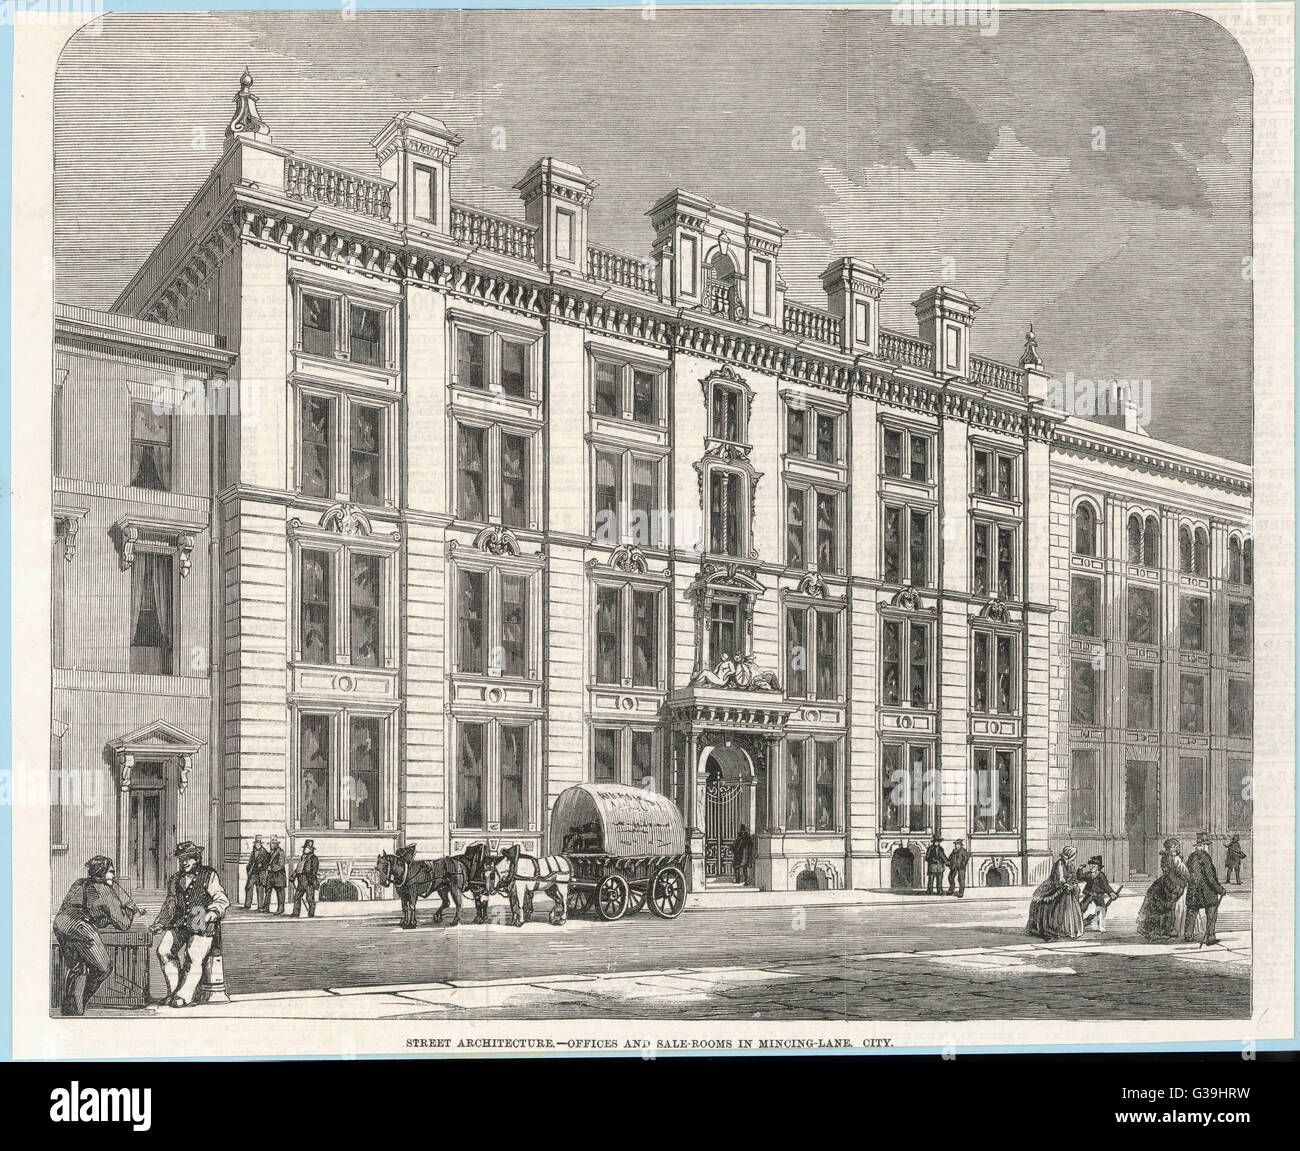 This building housing offices  and sale rooms is character- istic of the commercial  buildings springing up all  over London during the latter  half of the 19th century     Date: 1860 Stock Photo